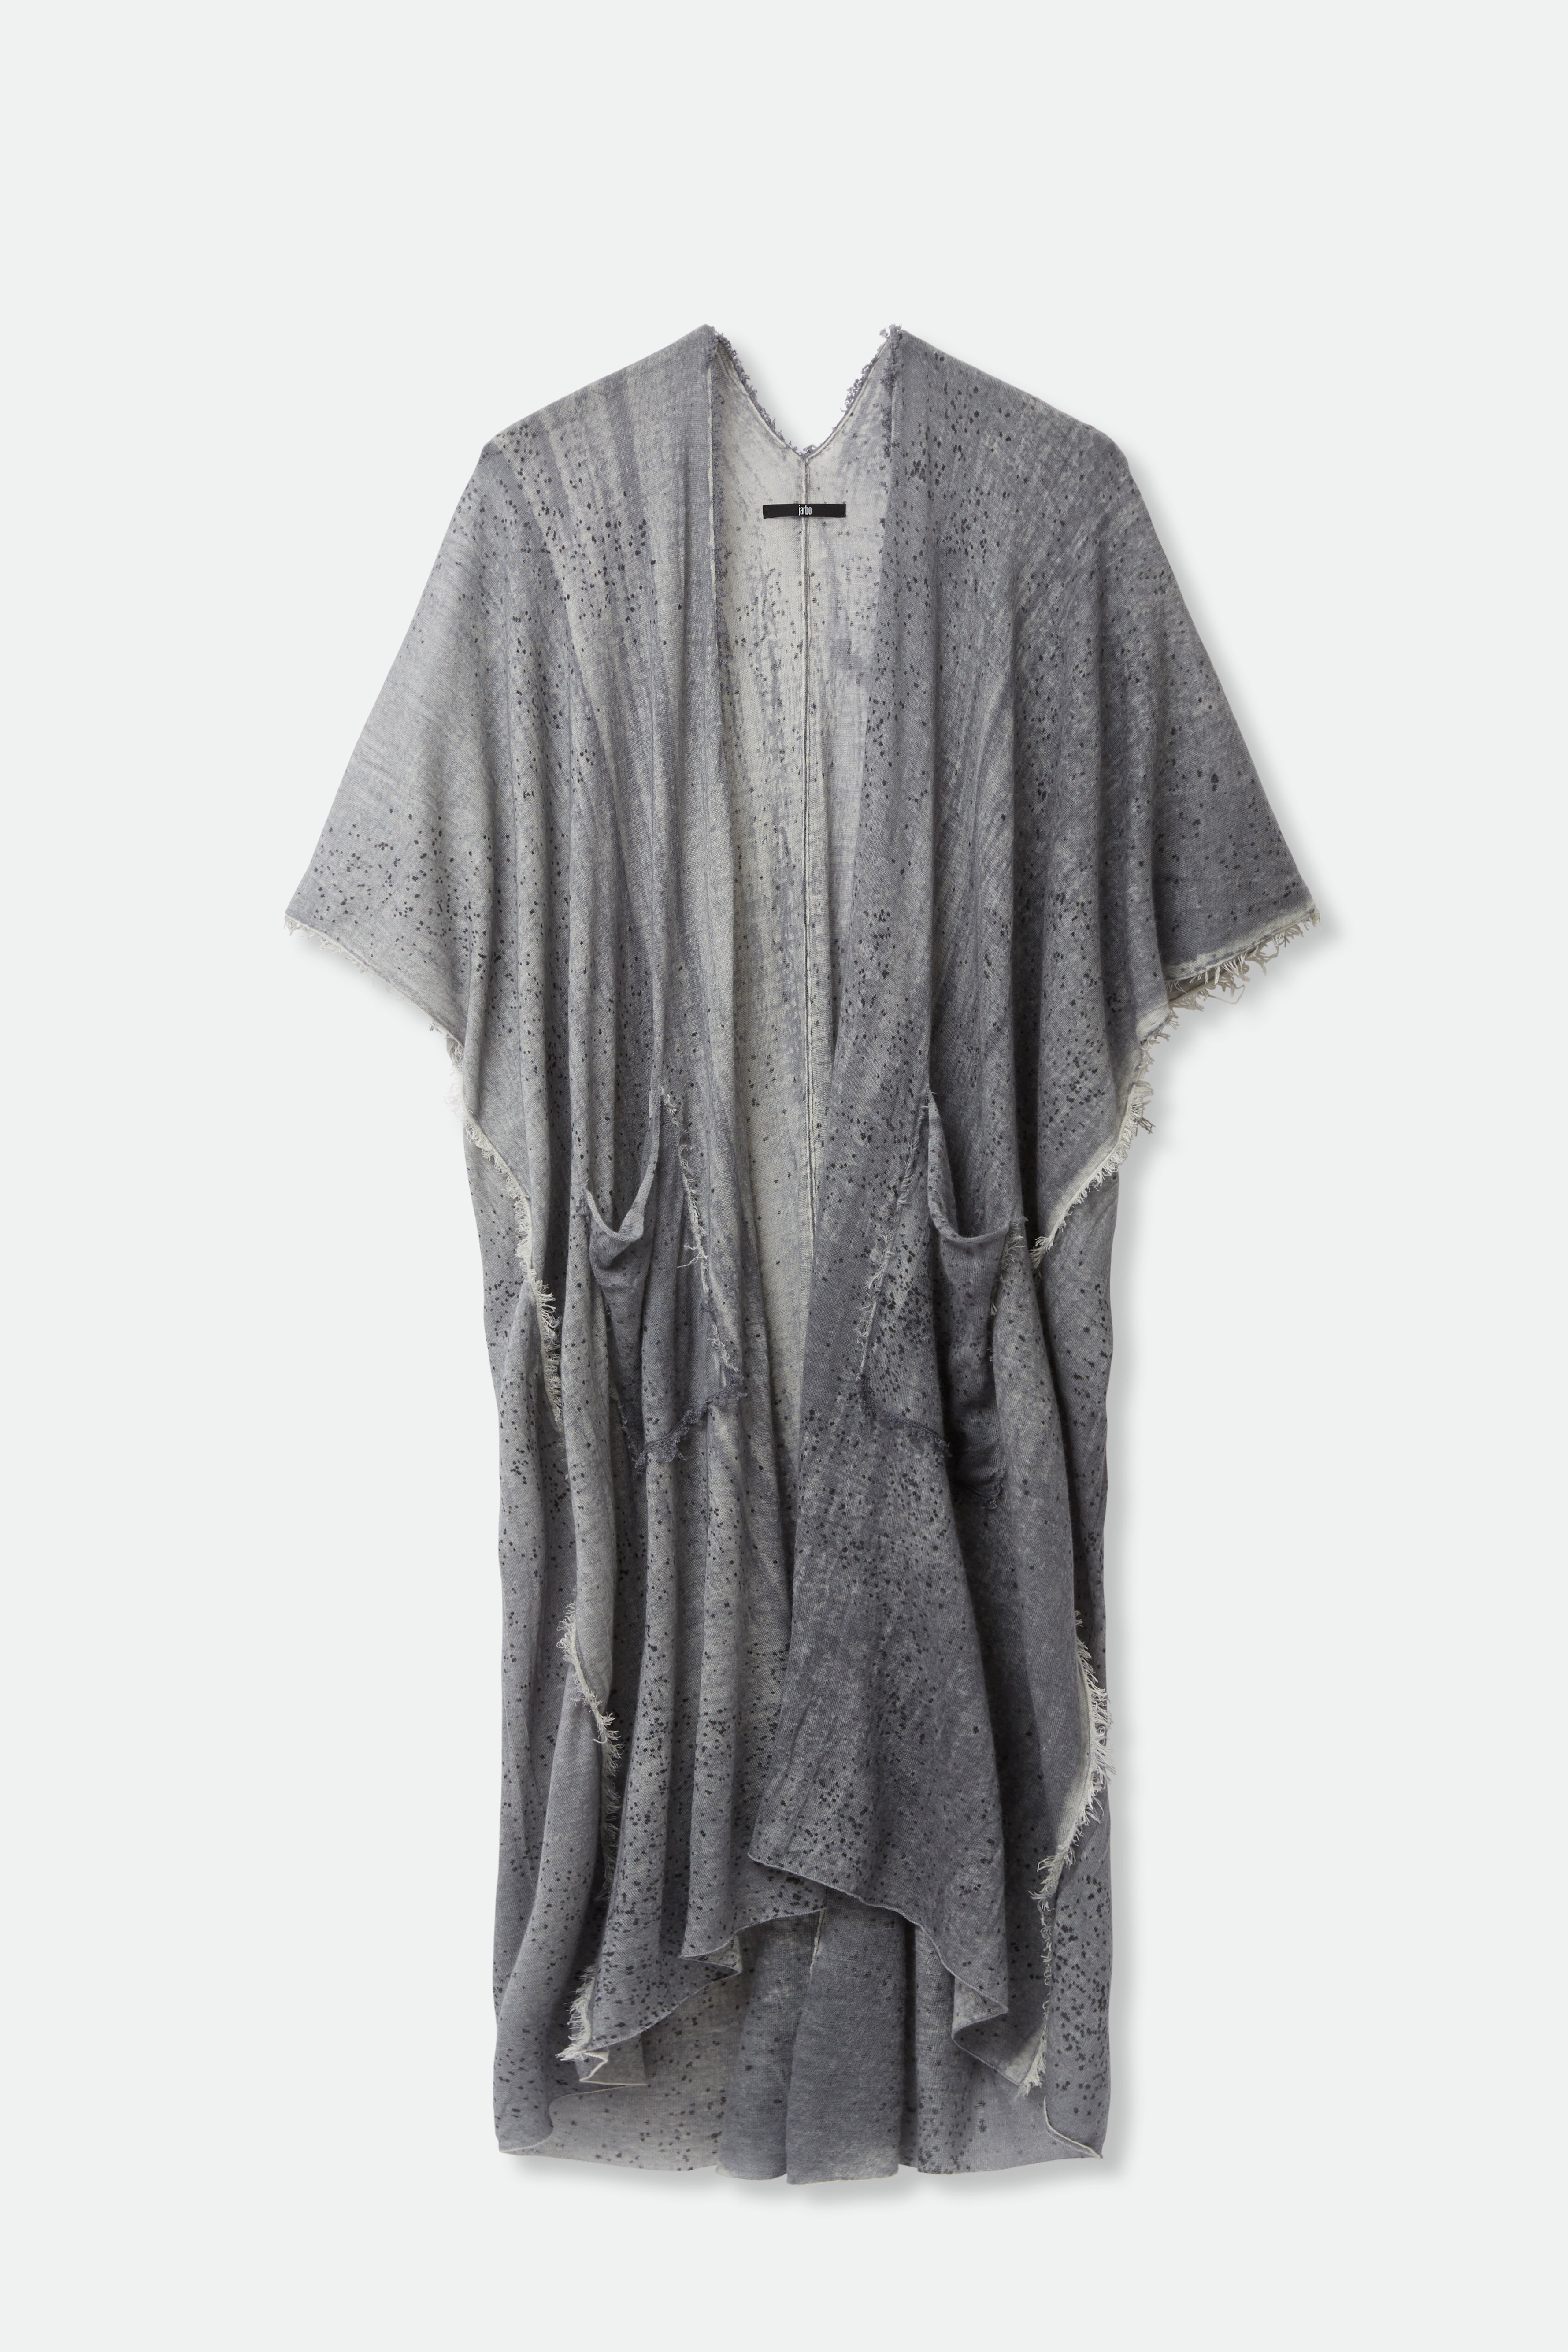 PATNA CARDIGAN IN HAND-DYED CASHMERE GREY - Jarbo